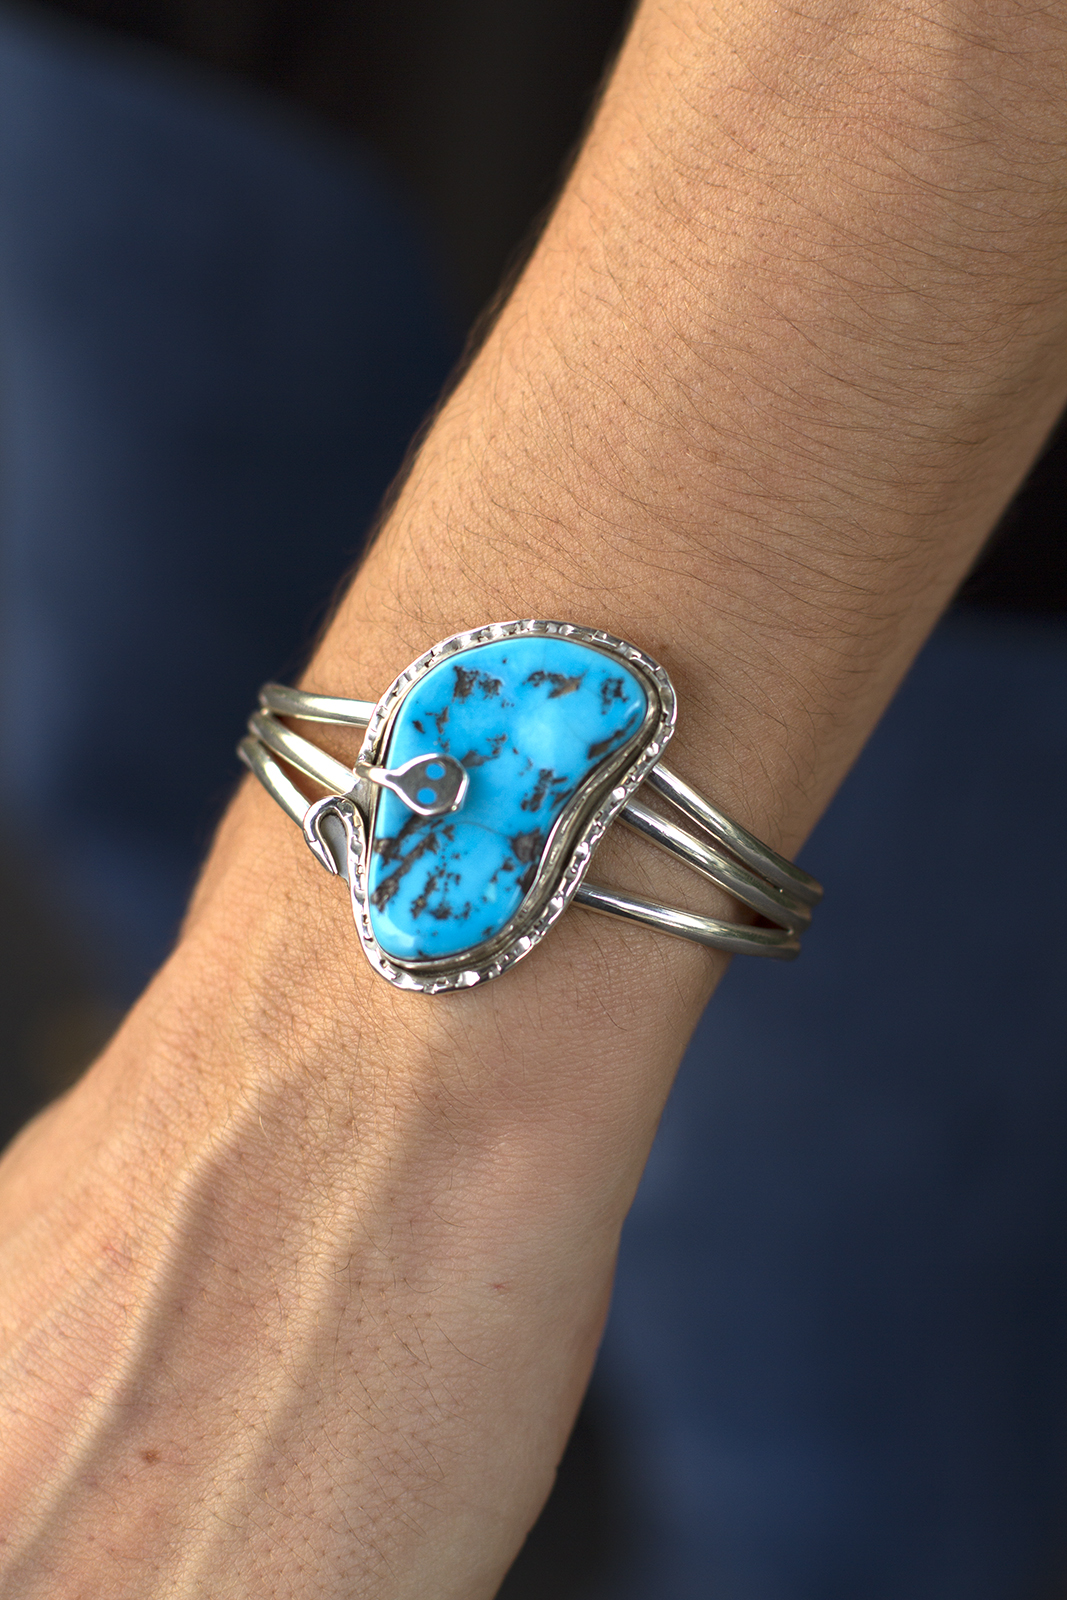 Adorn Your Hands With Turquoise Bracelets